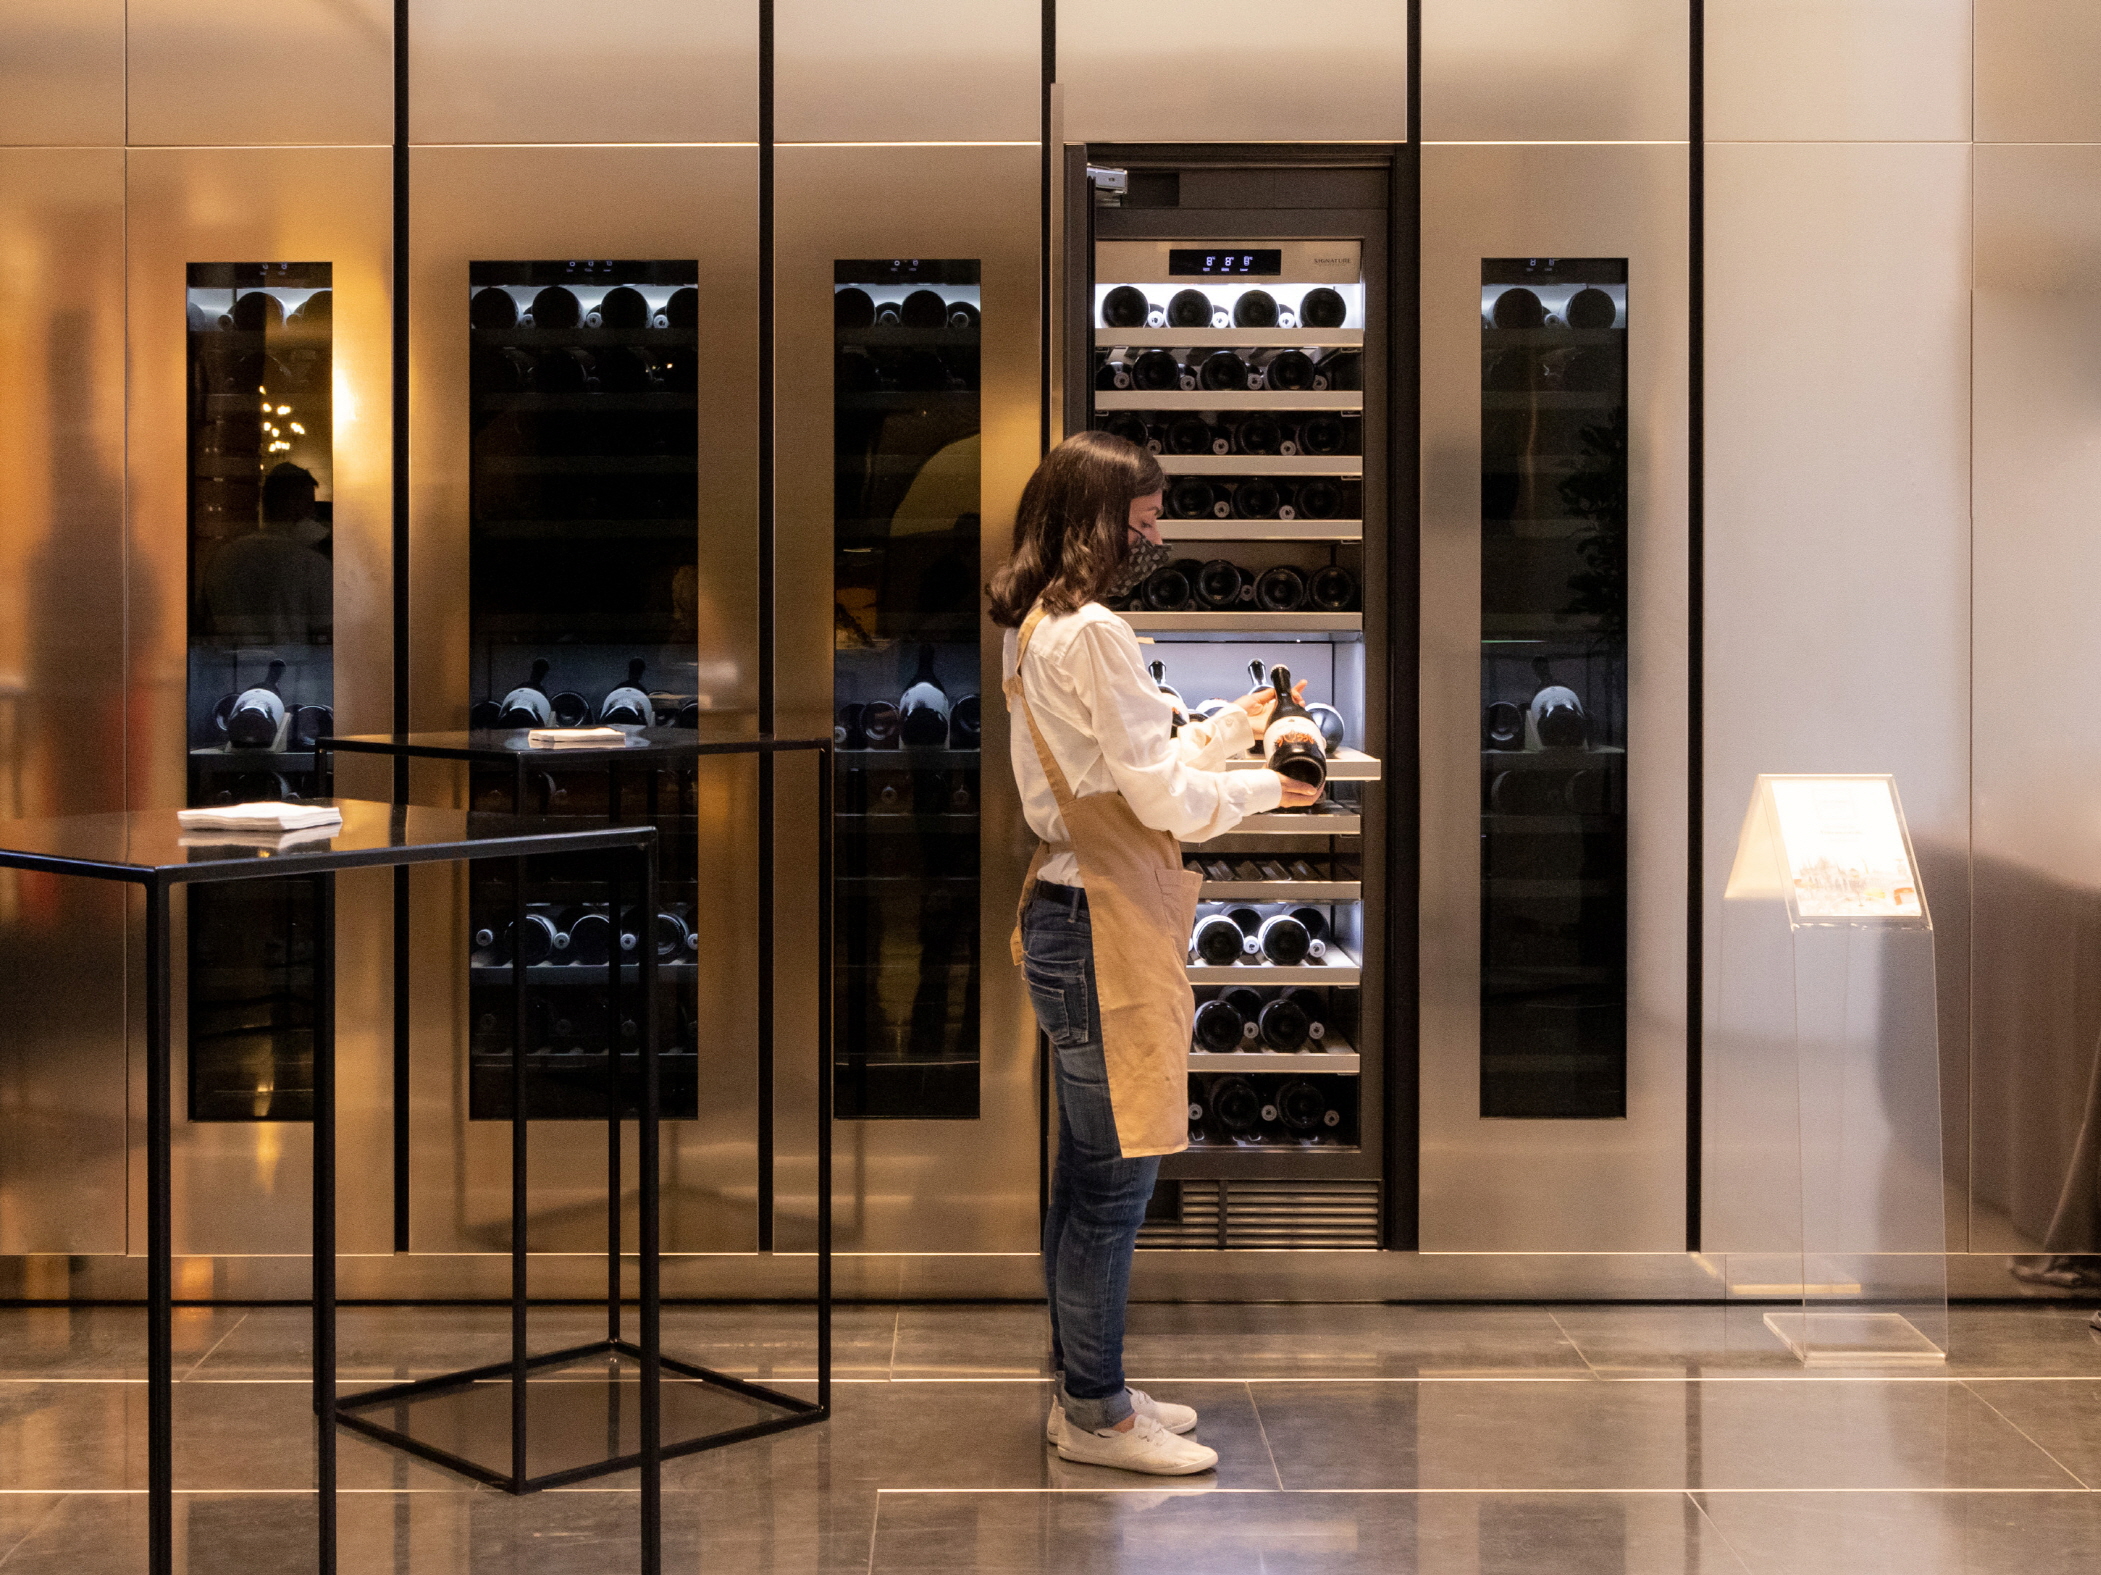 Signature Kitchen Suite 18-inch and 24-inch column wine cellars are showcased at the Signature Kitchen Suite showroom in Piazza Cavour, Milan, Italy